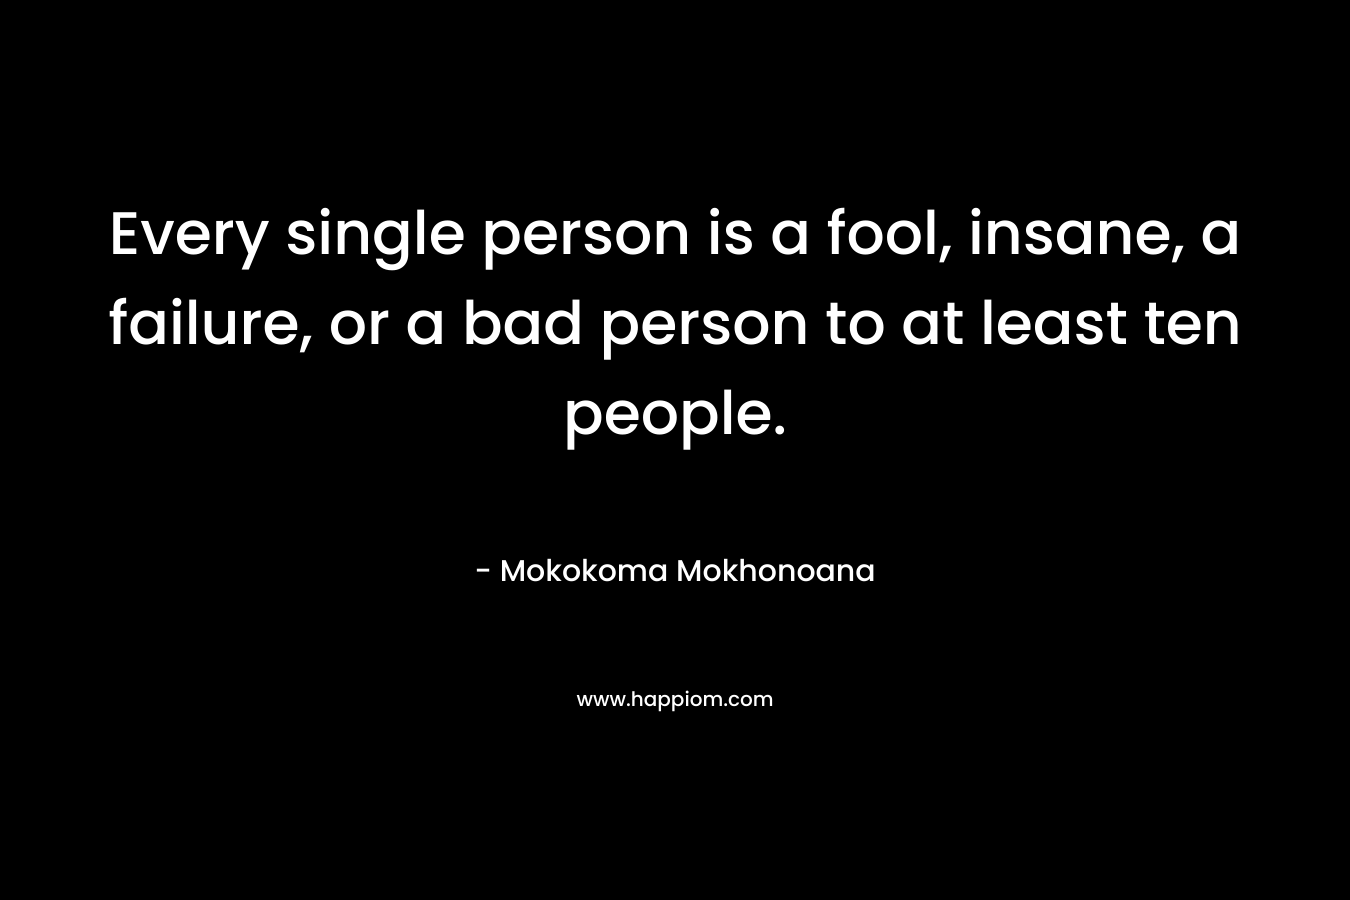 Every single person is a fool, insane, a failure, or a bad person to at least ten people.